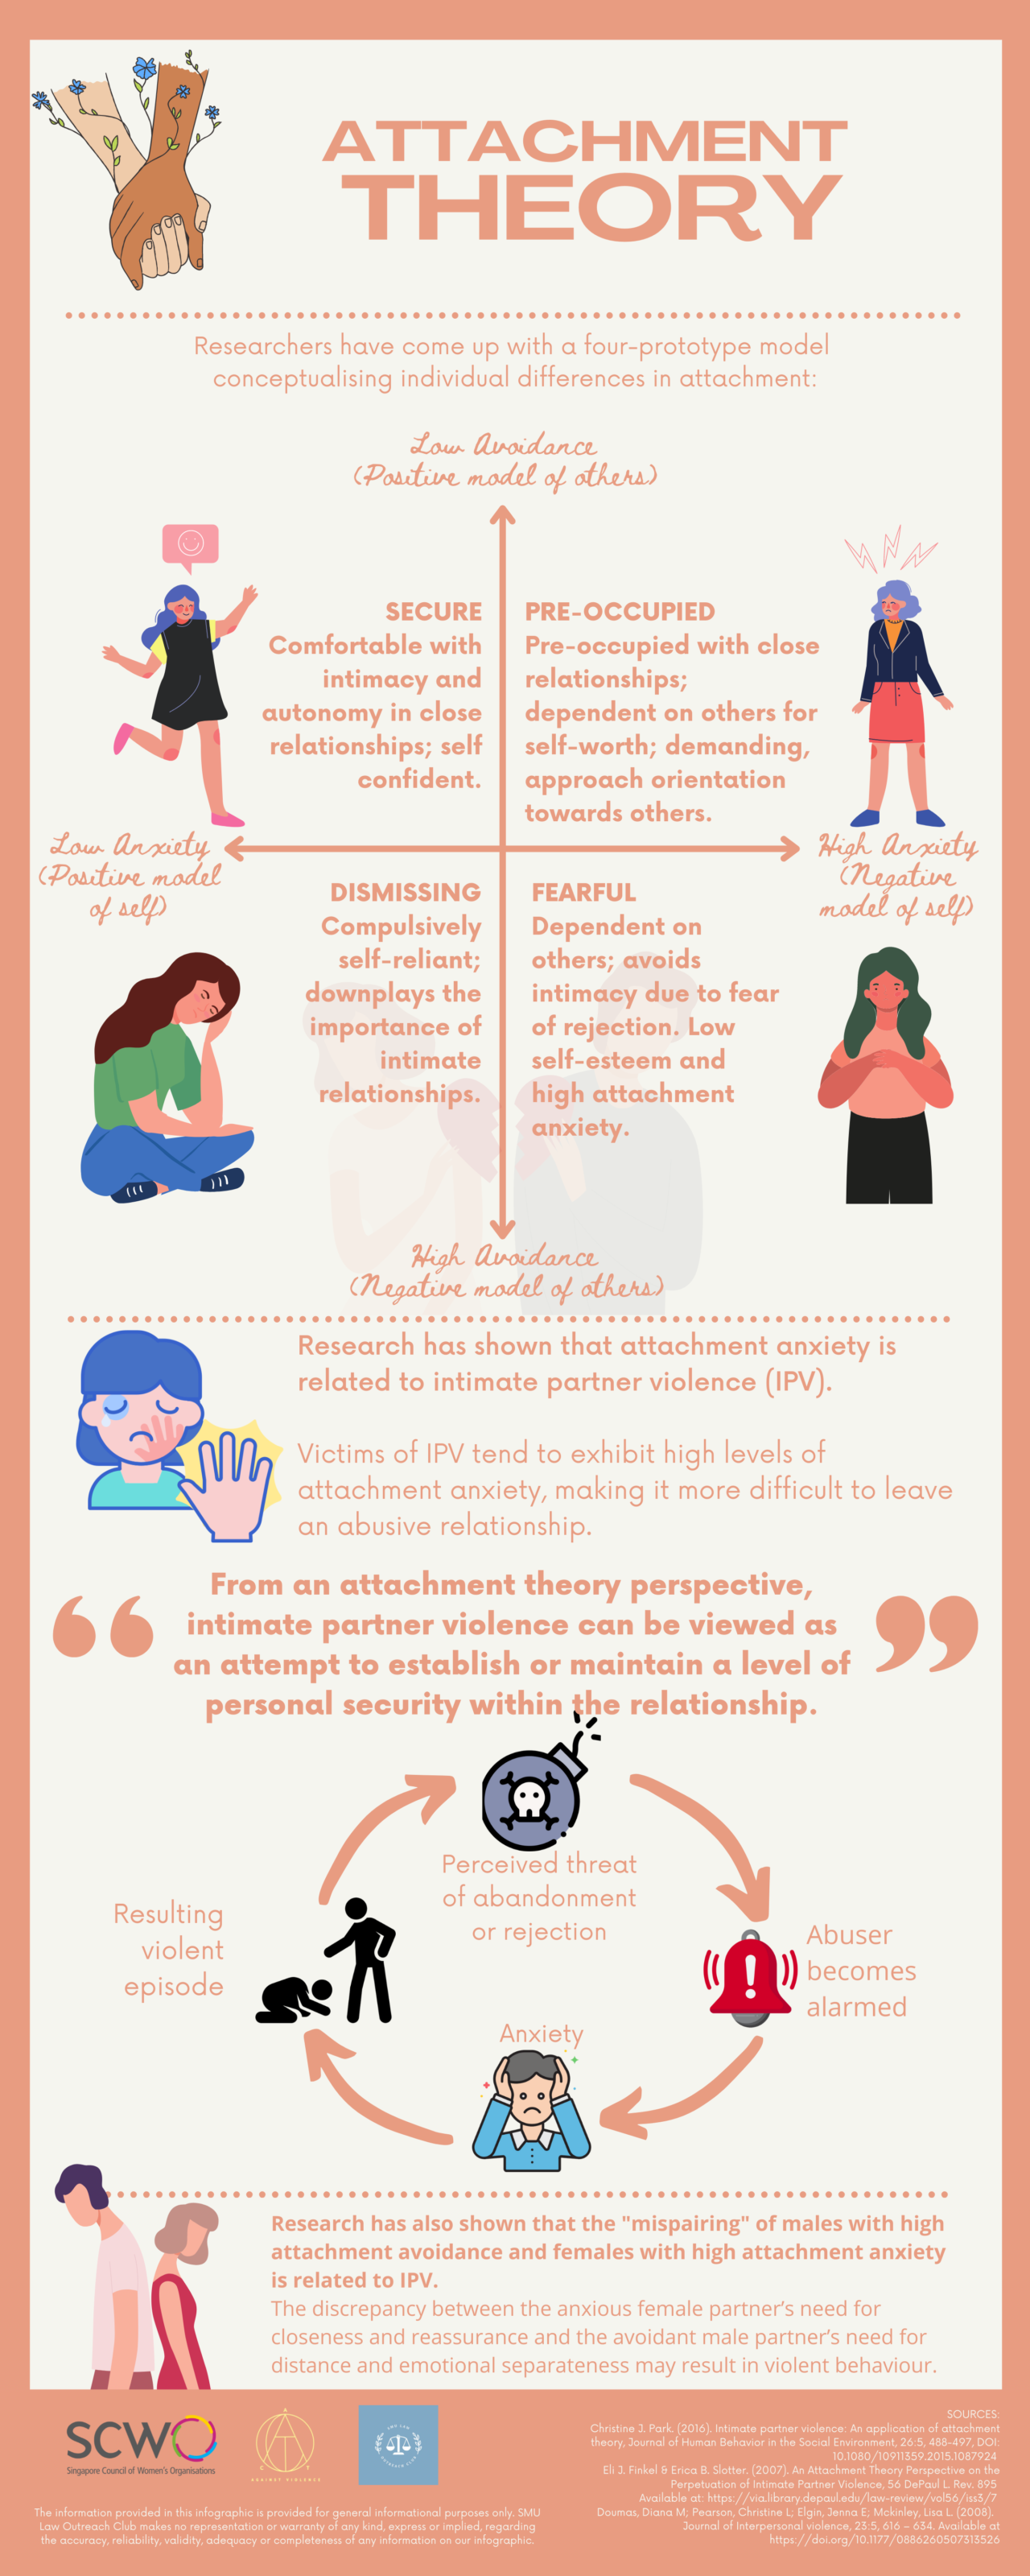 4. Attachment Theory Infographic 1280x3200 